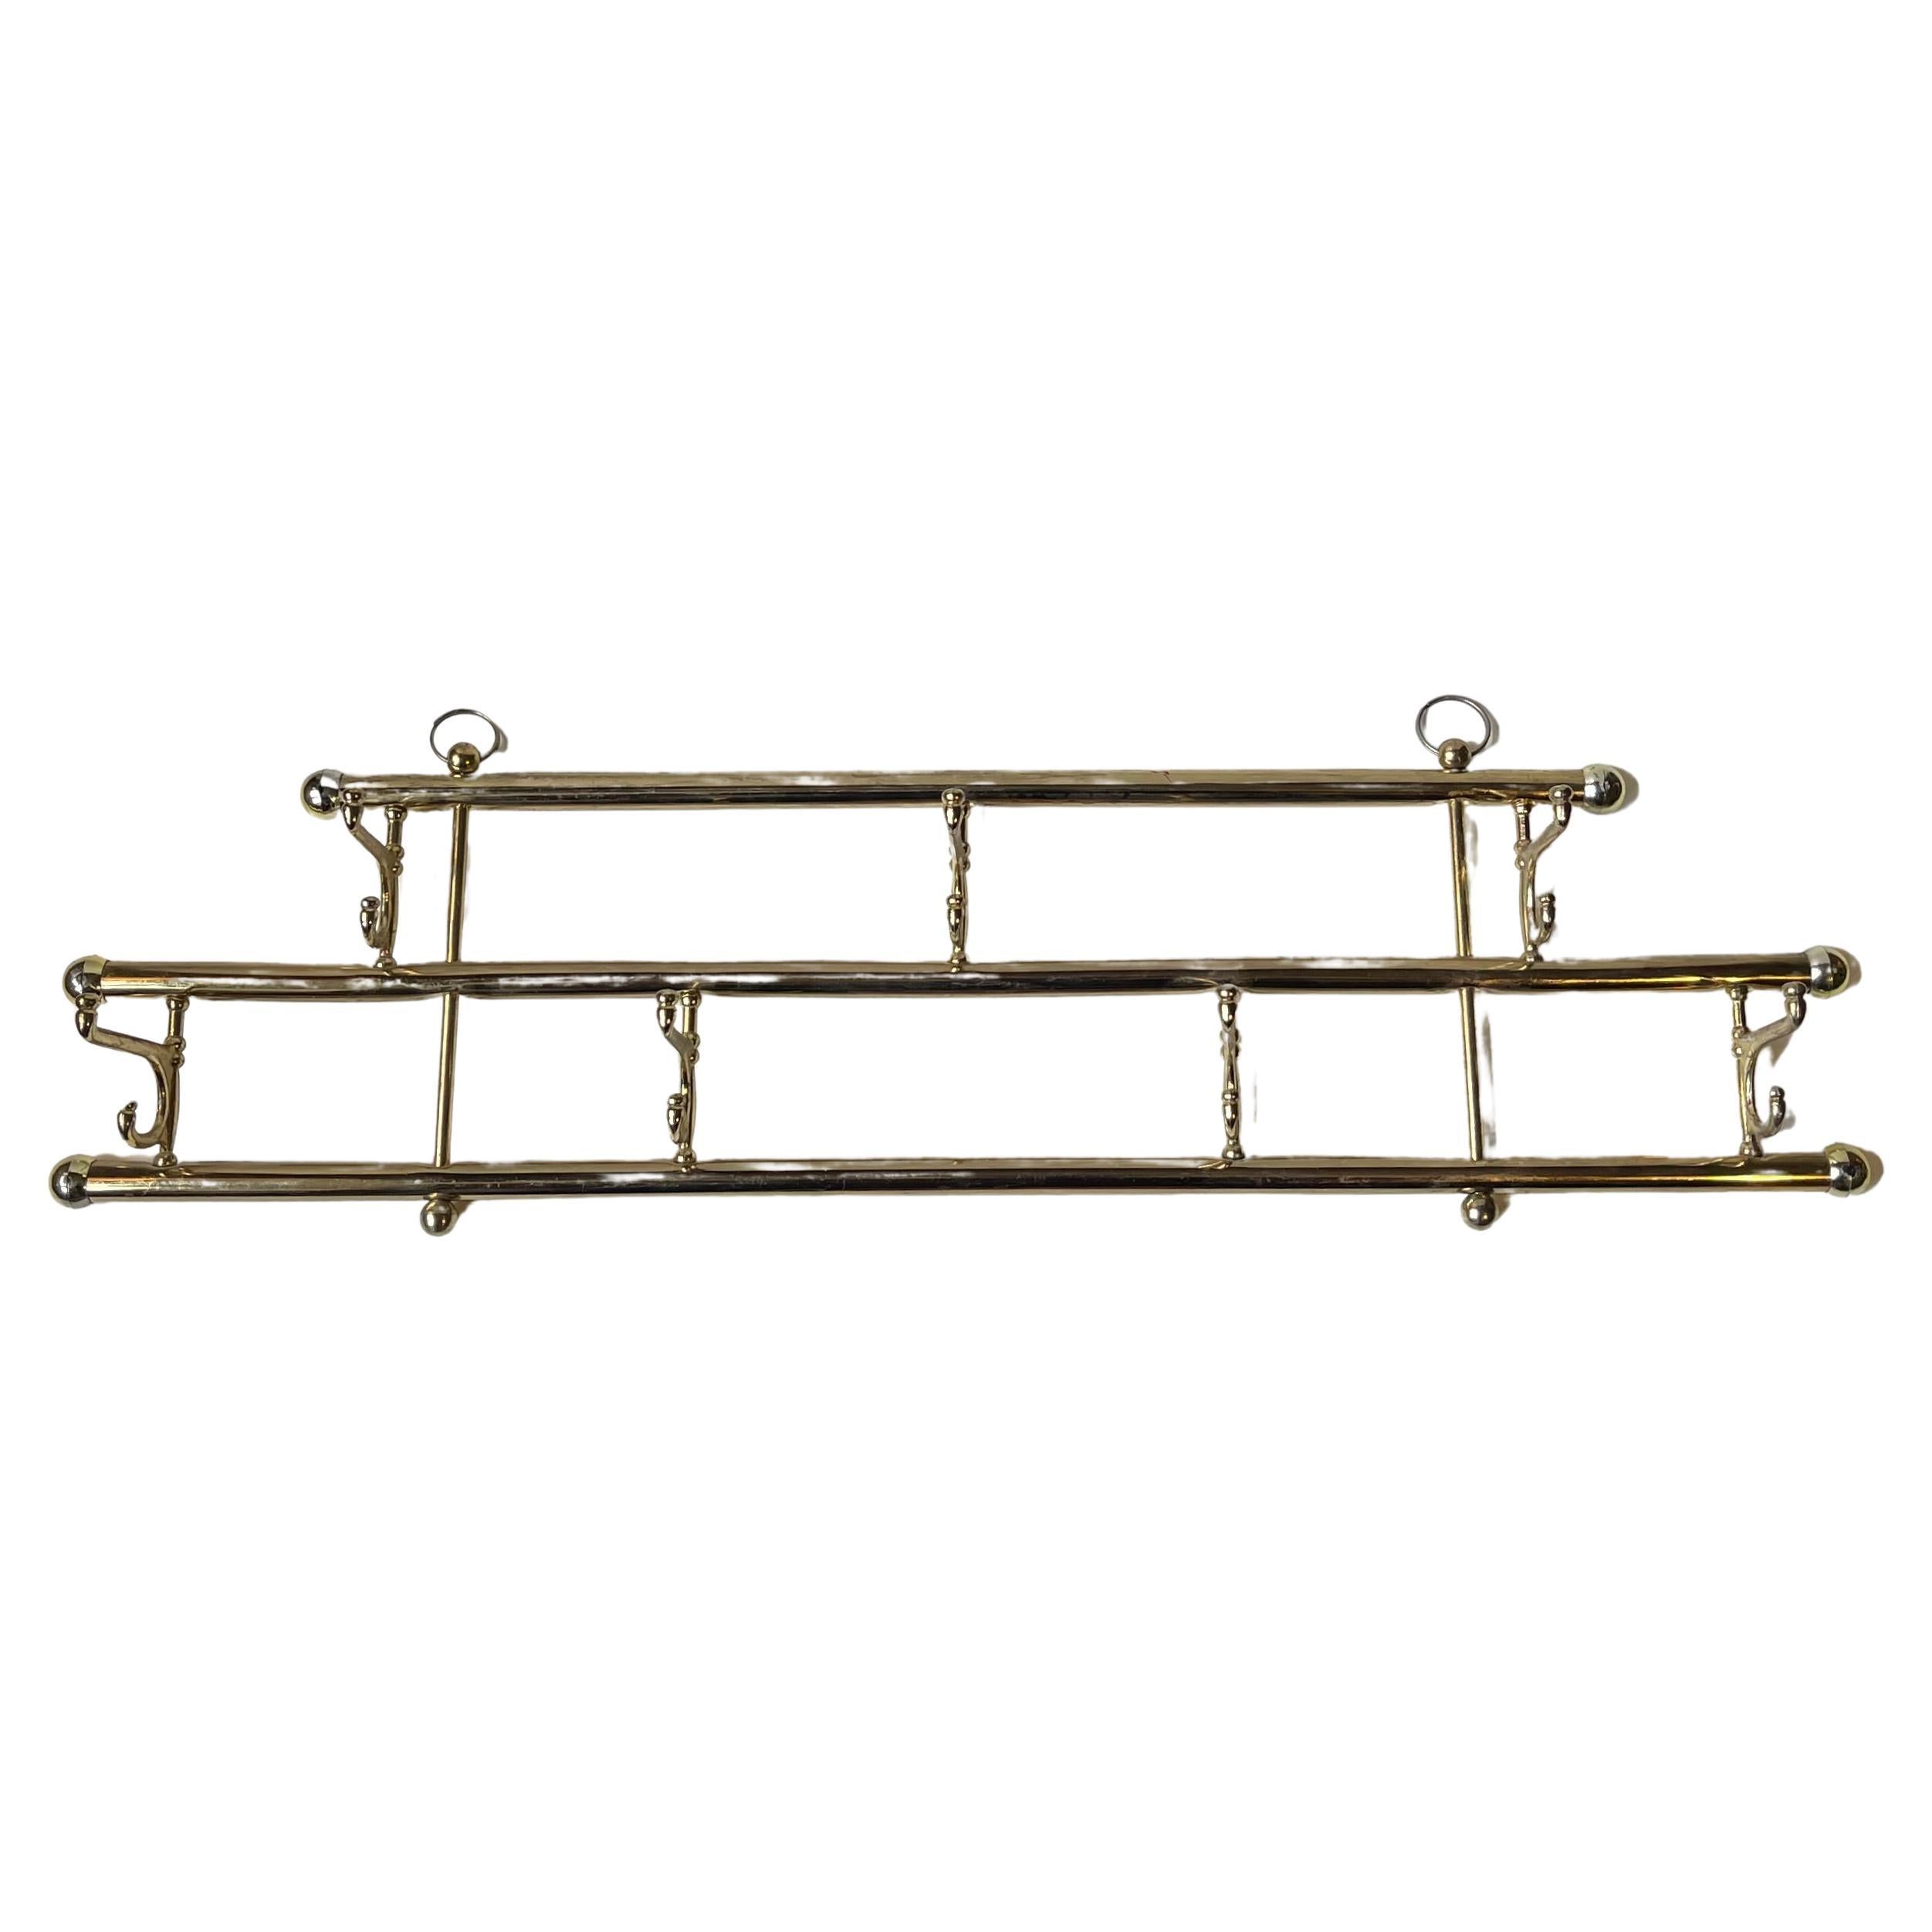 https://a.1stdibscdn.com/vintage-towel-or-small-coat-rack-in-brass-and-gold-chrome-for-sale/f_17822/f_364051721696106812839/f_36405172_1696106813445_bg_processed.jpg